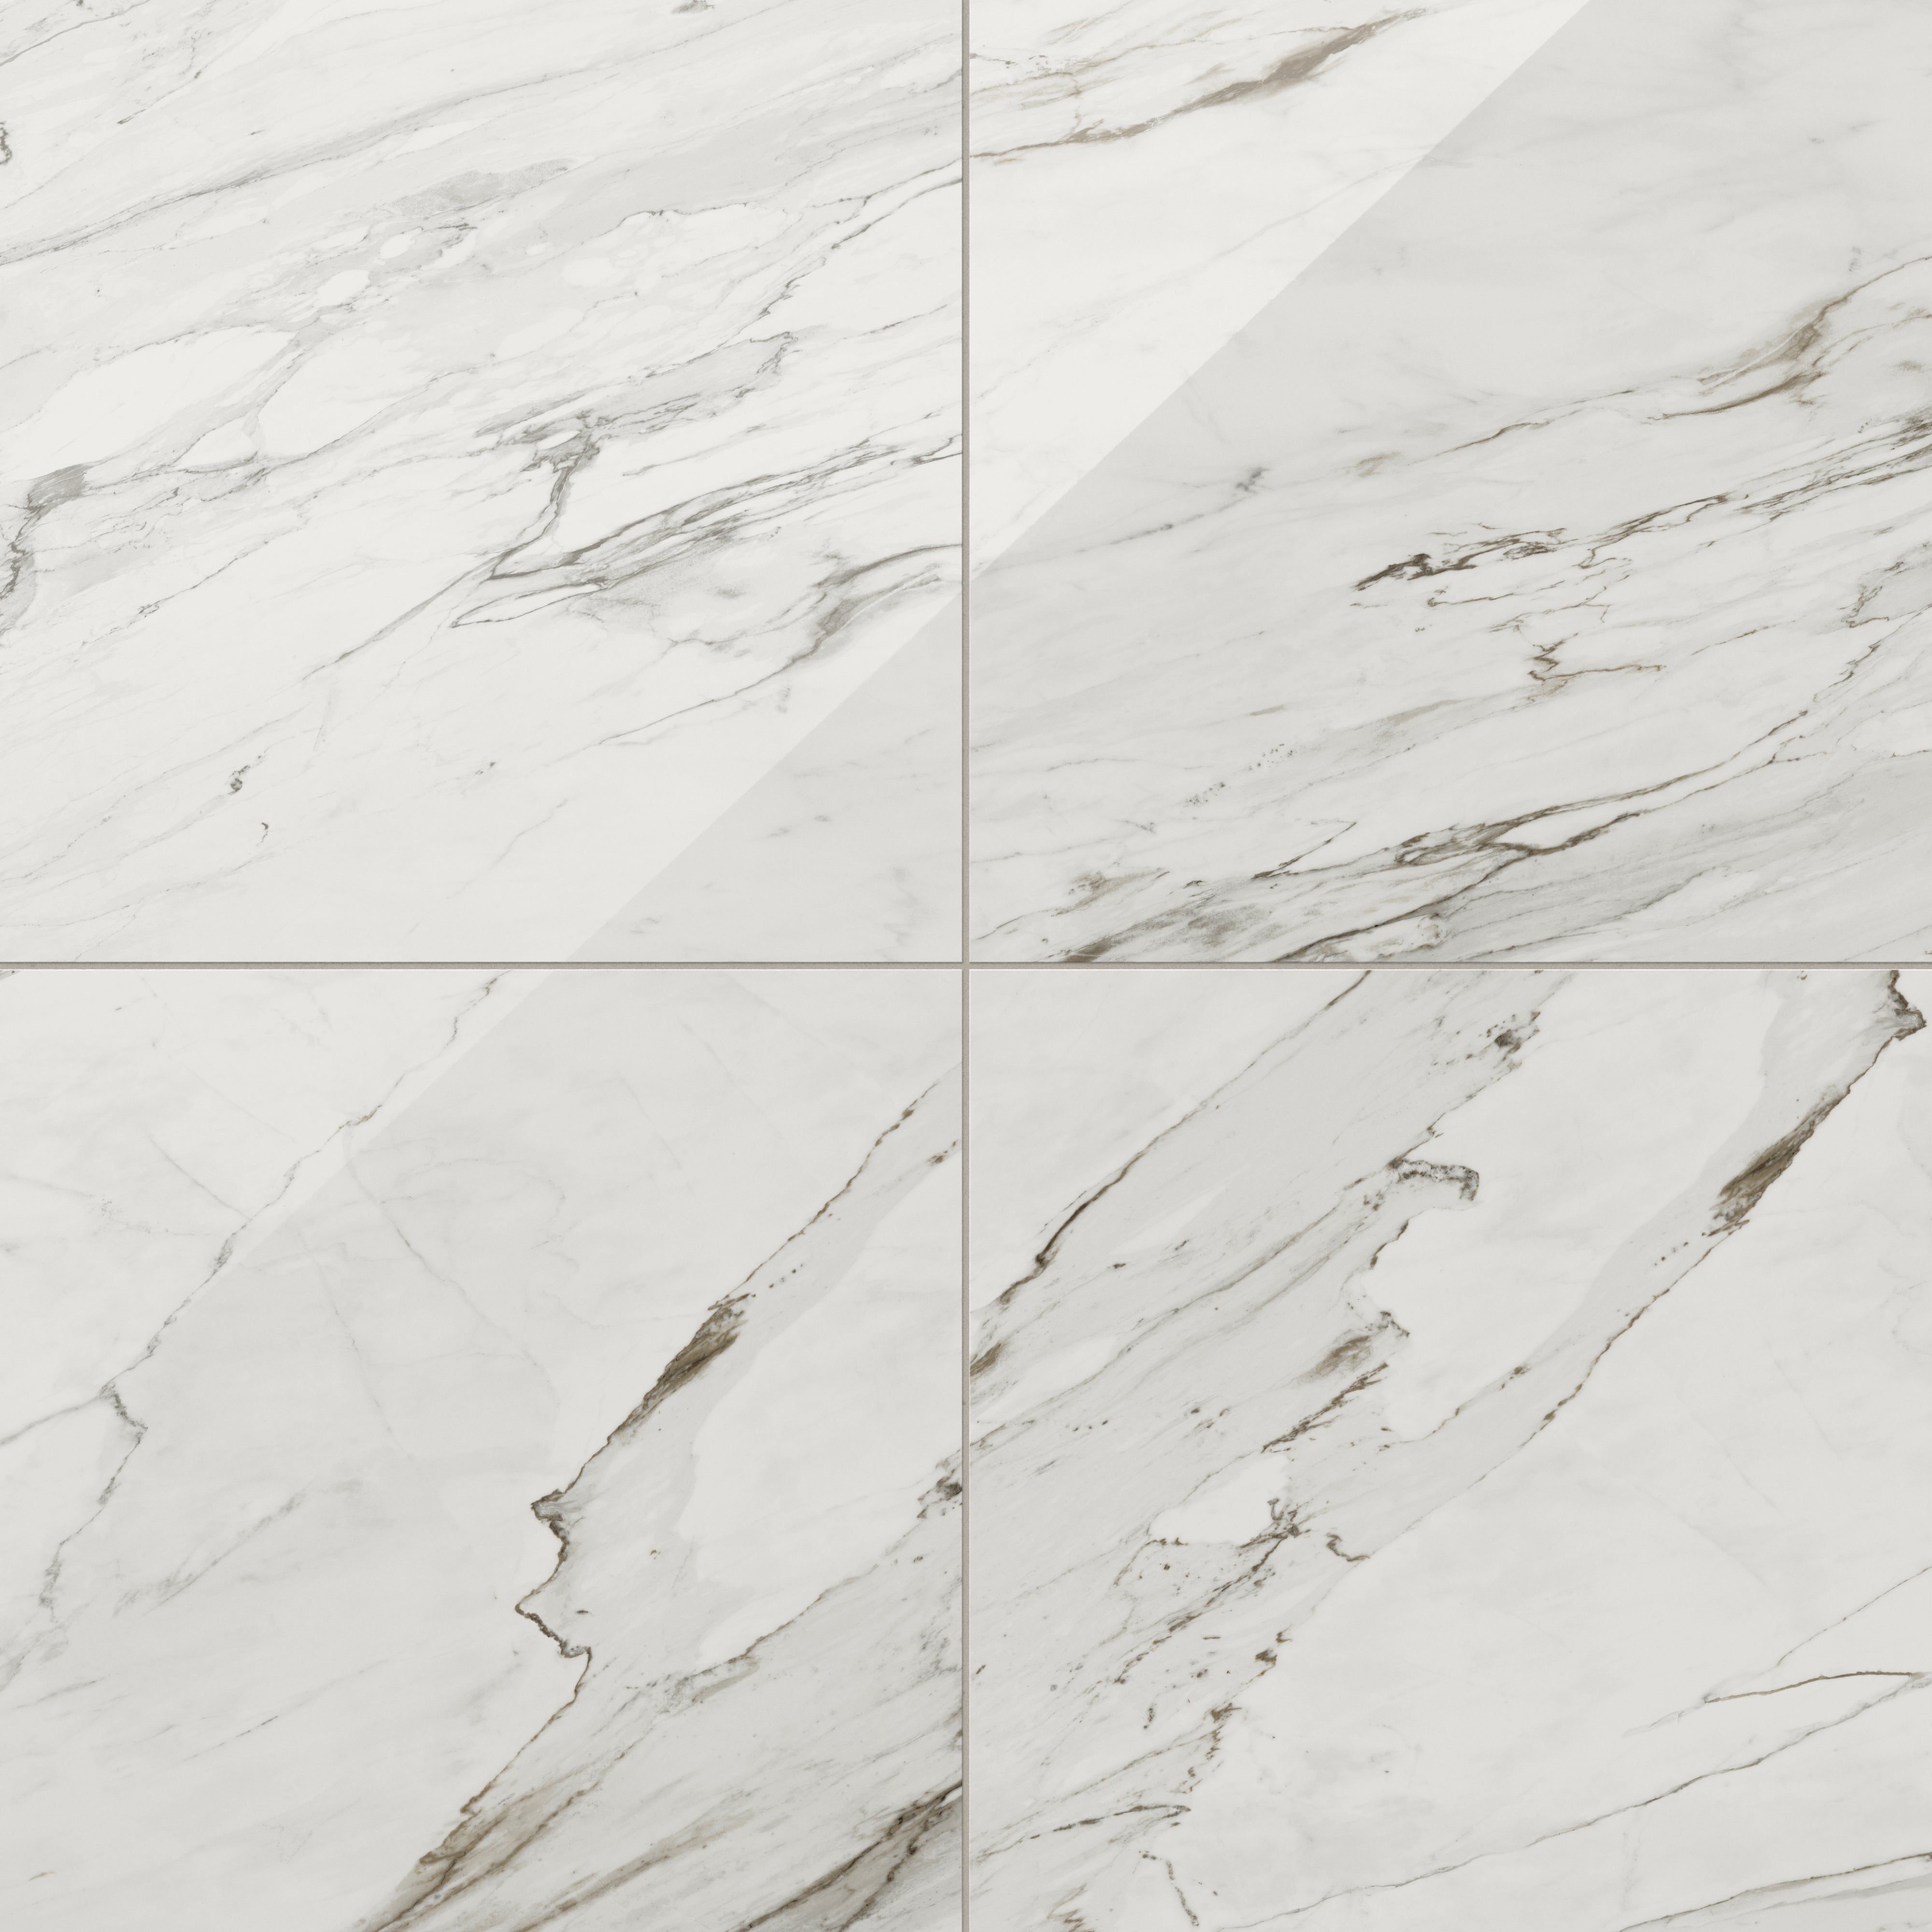 Chantel 24x24 Polished Porcelain Tile in Apuano